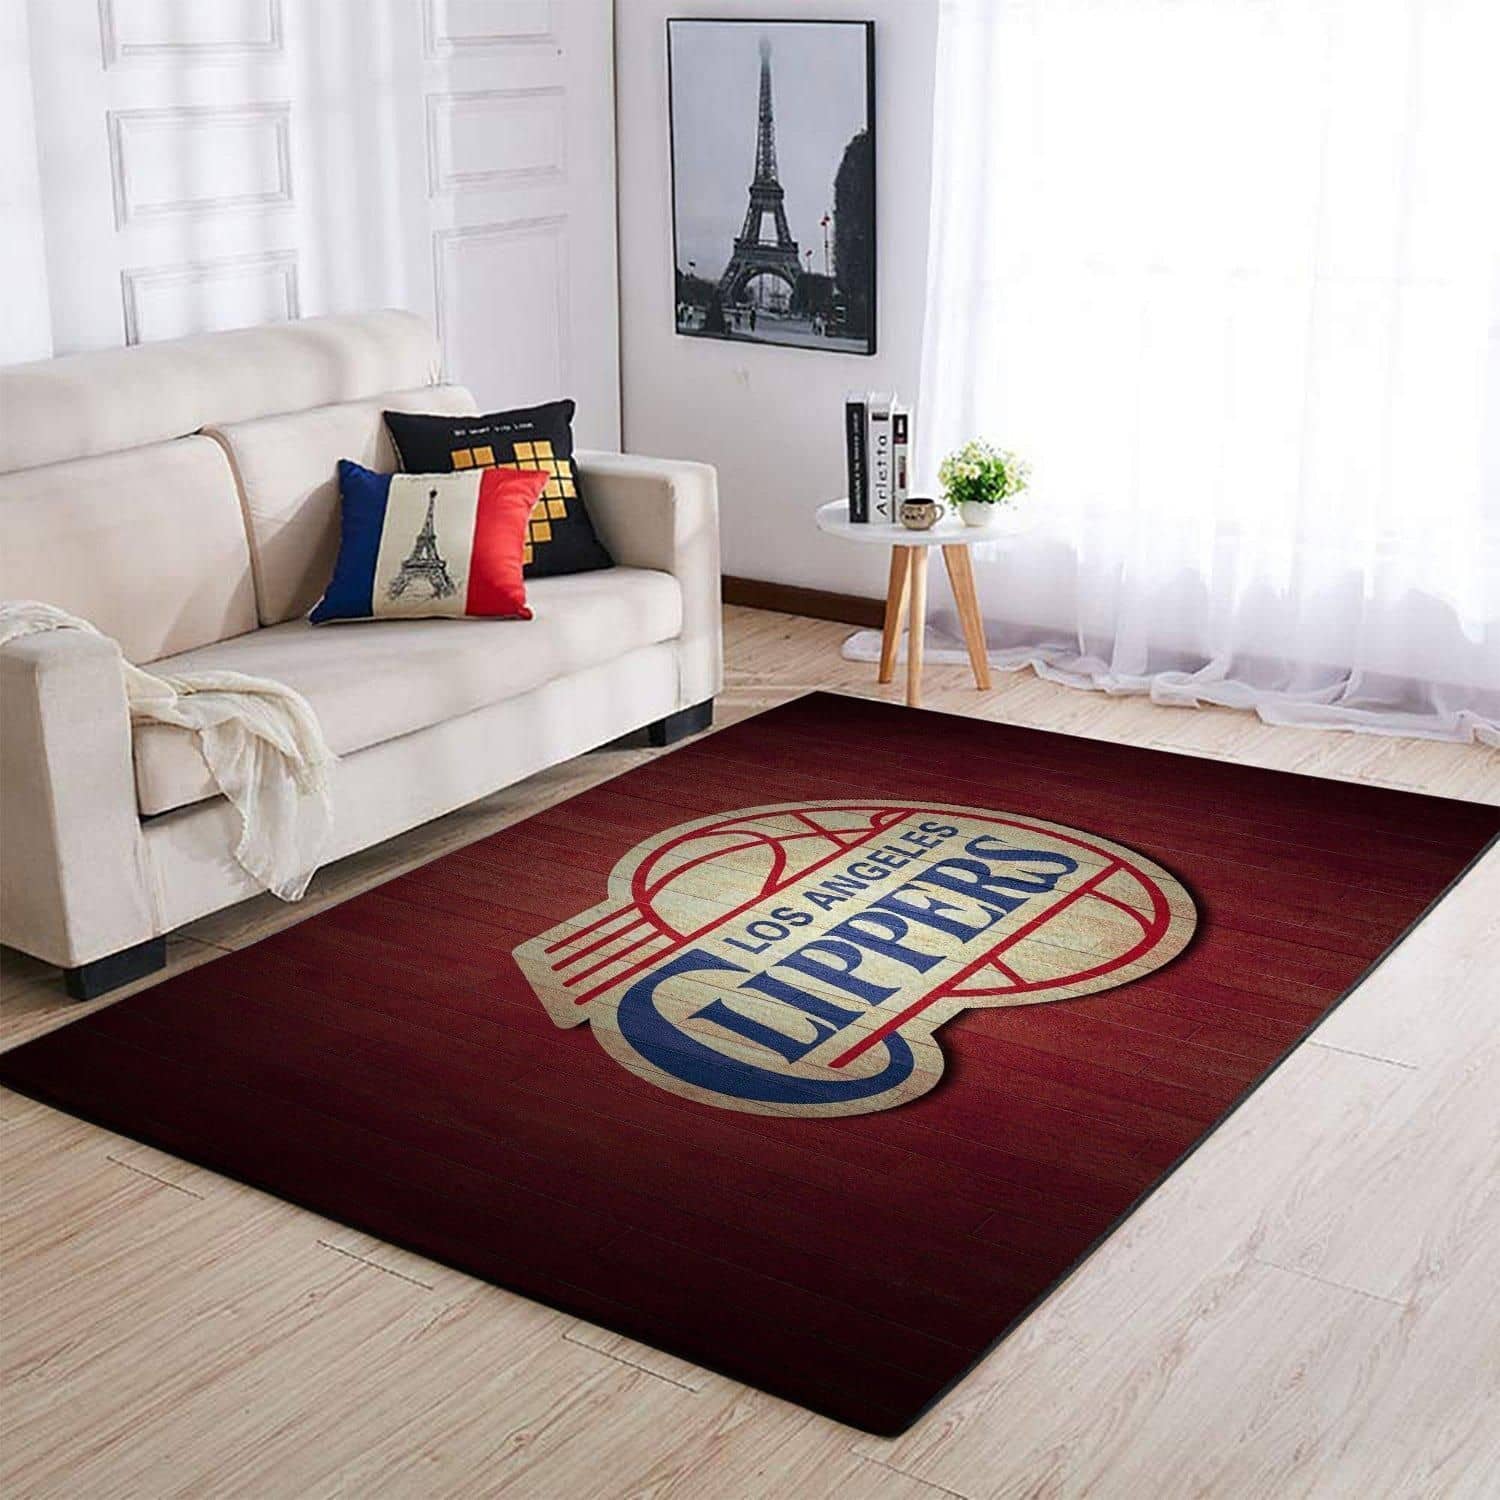 Amazon Los Angeles Clippers Living Room Area No3567 Rug